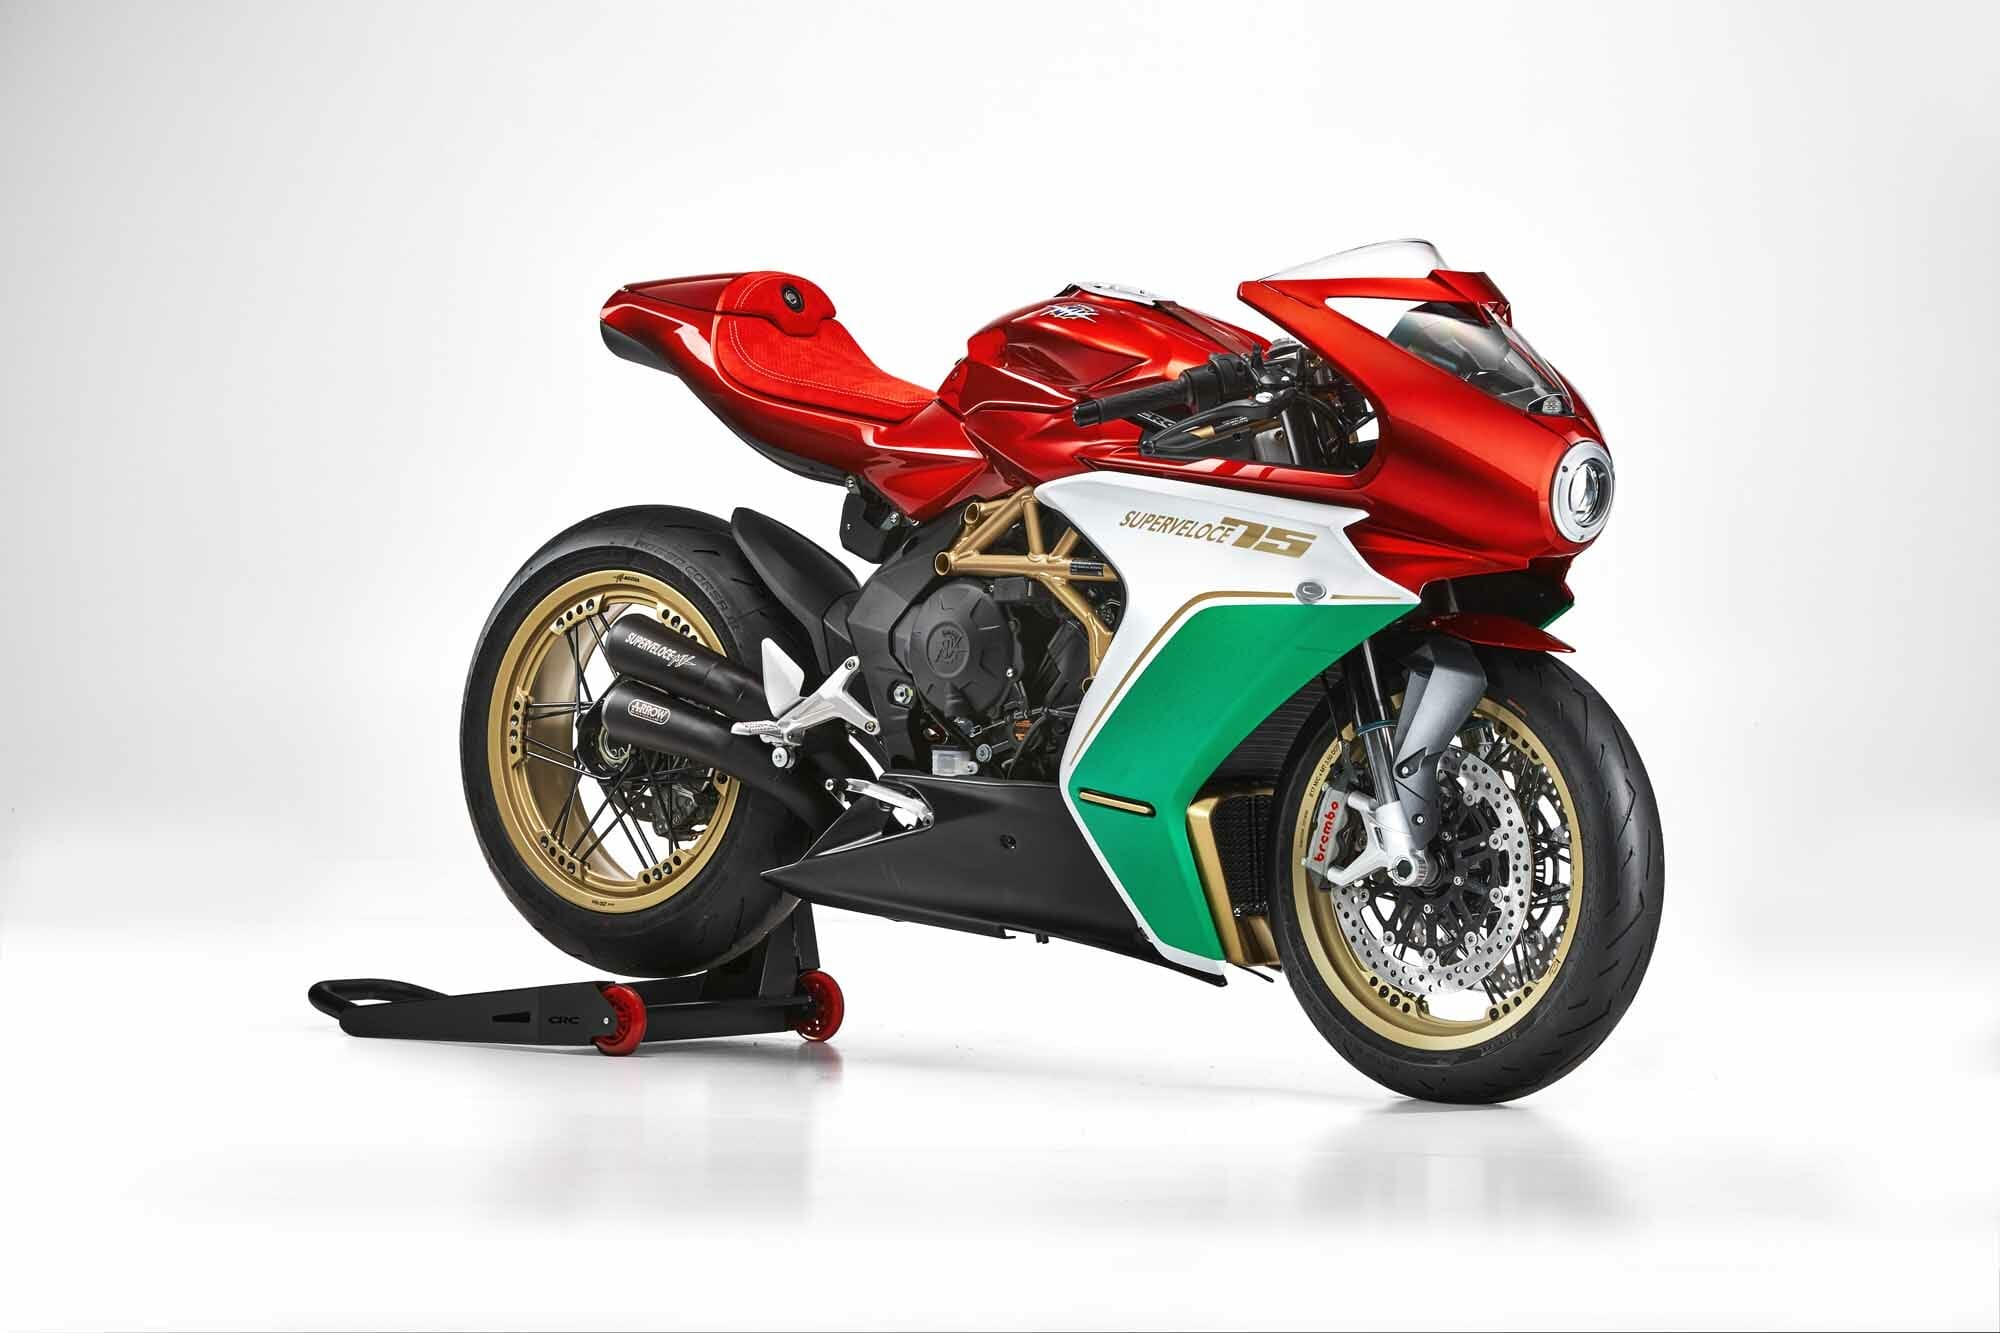 MV Agusta Superveloce 75 Anniversario
- also in the App MOTORCYCLE NEWS